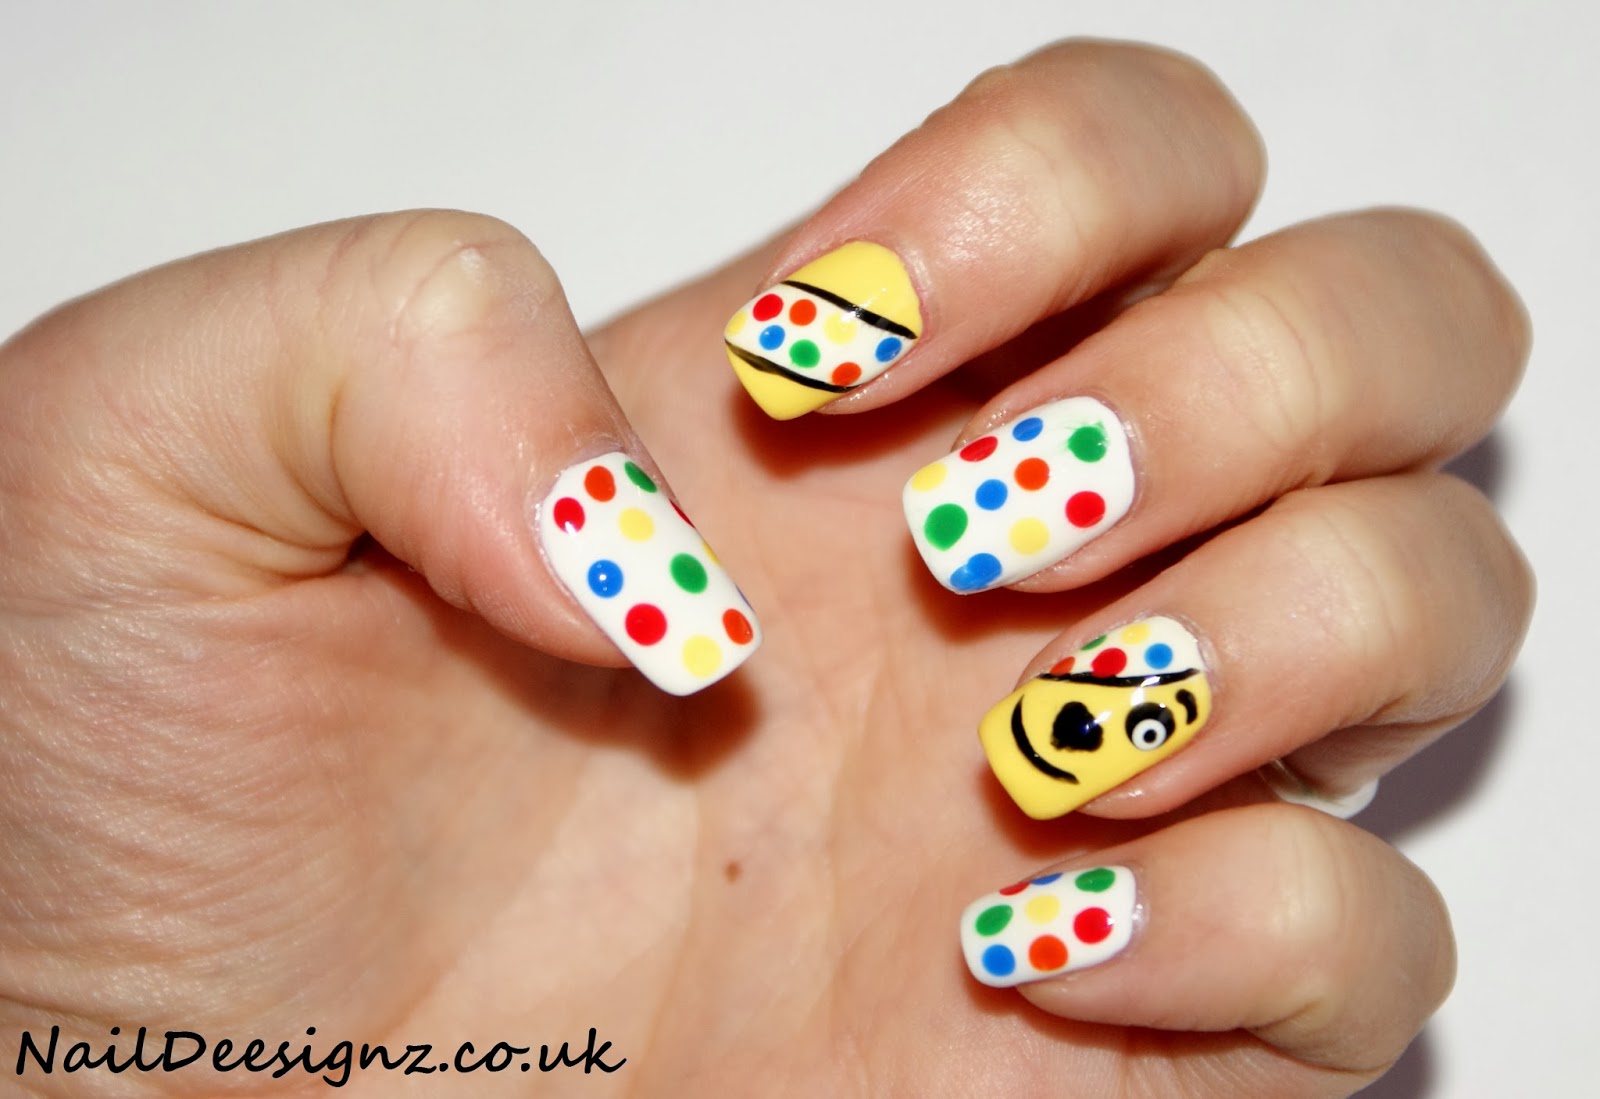 Long Nail Designs for Kids - wide 4